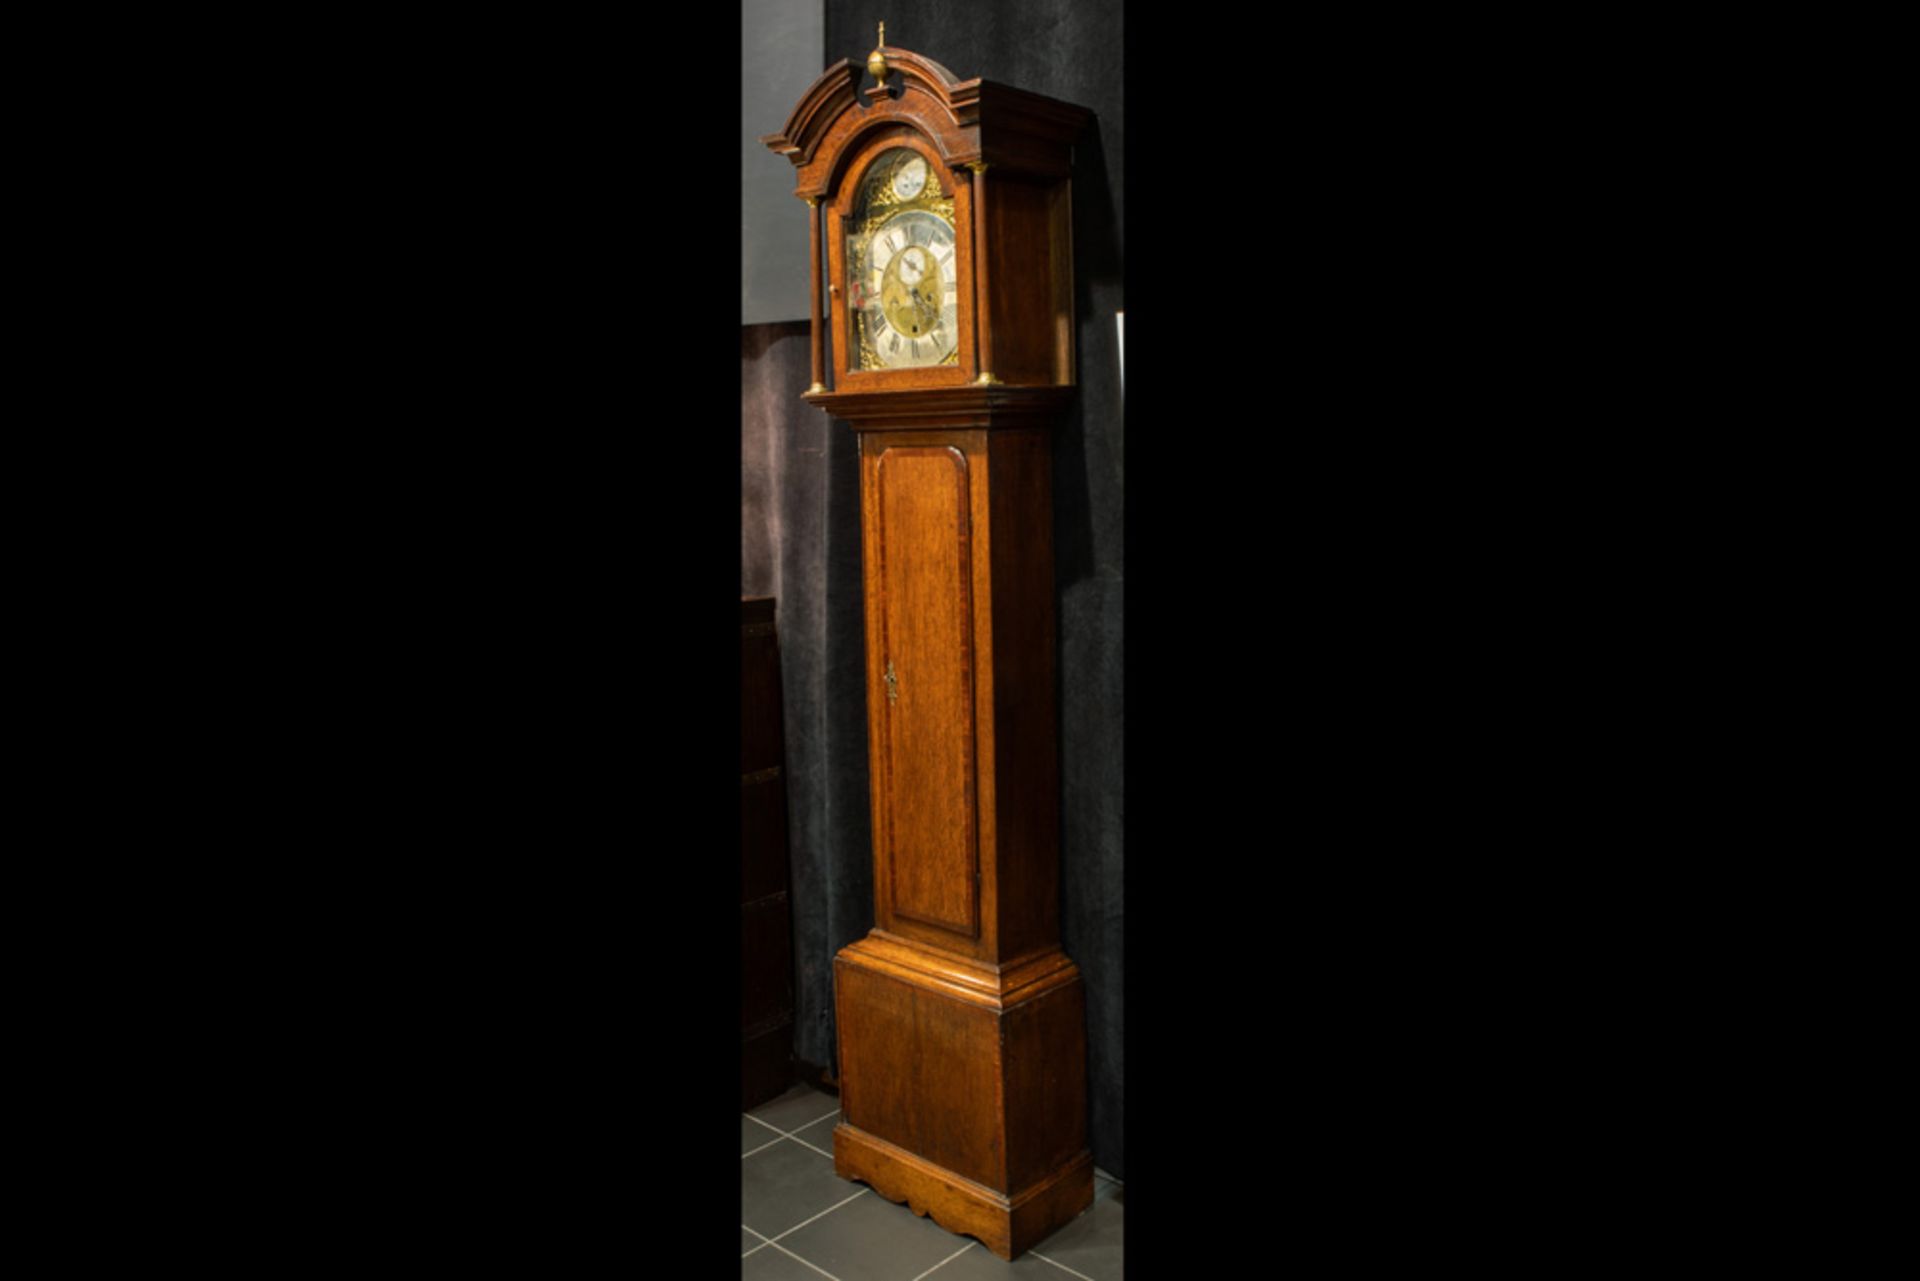 antique English longcase clock with case in oak and mahogany and with a "John ... - Sunderland" - Image 2 of 3